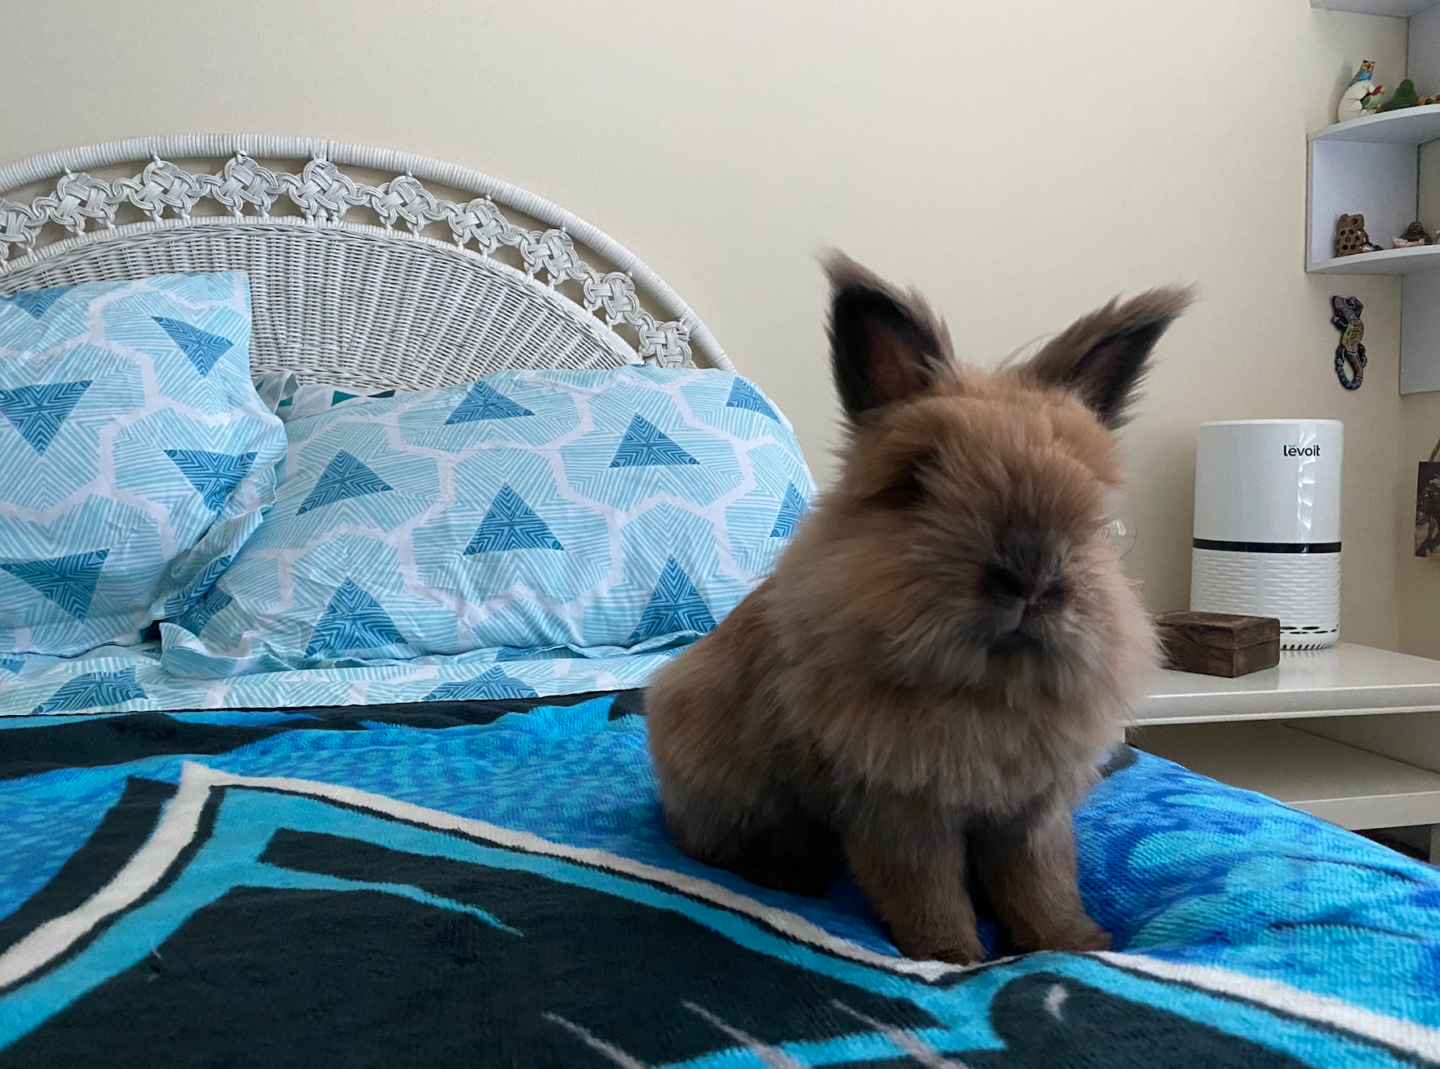 Since We Can’t Visit The Easter Bunny, Photos of My Lionhead Rabbit is the Next Best Thing!